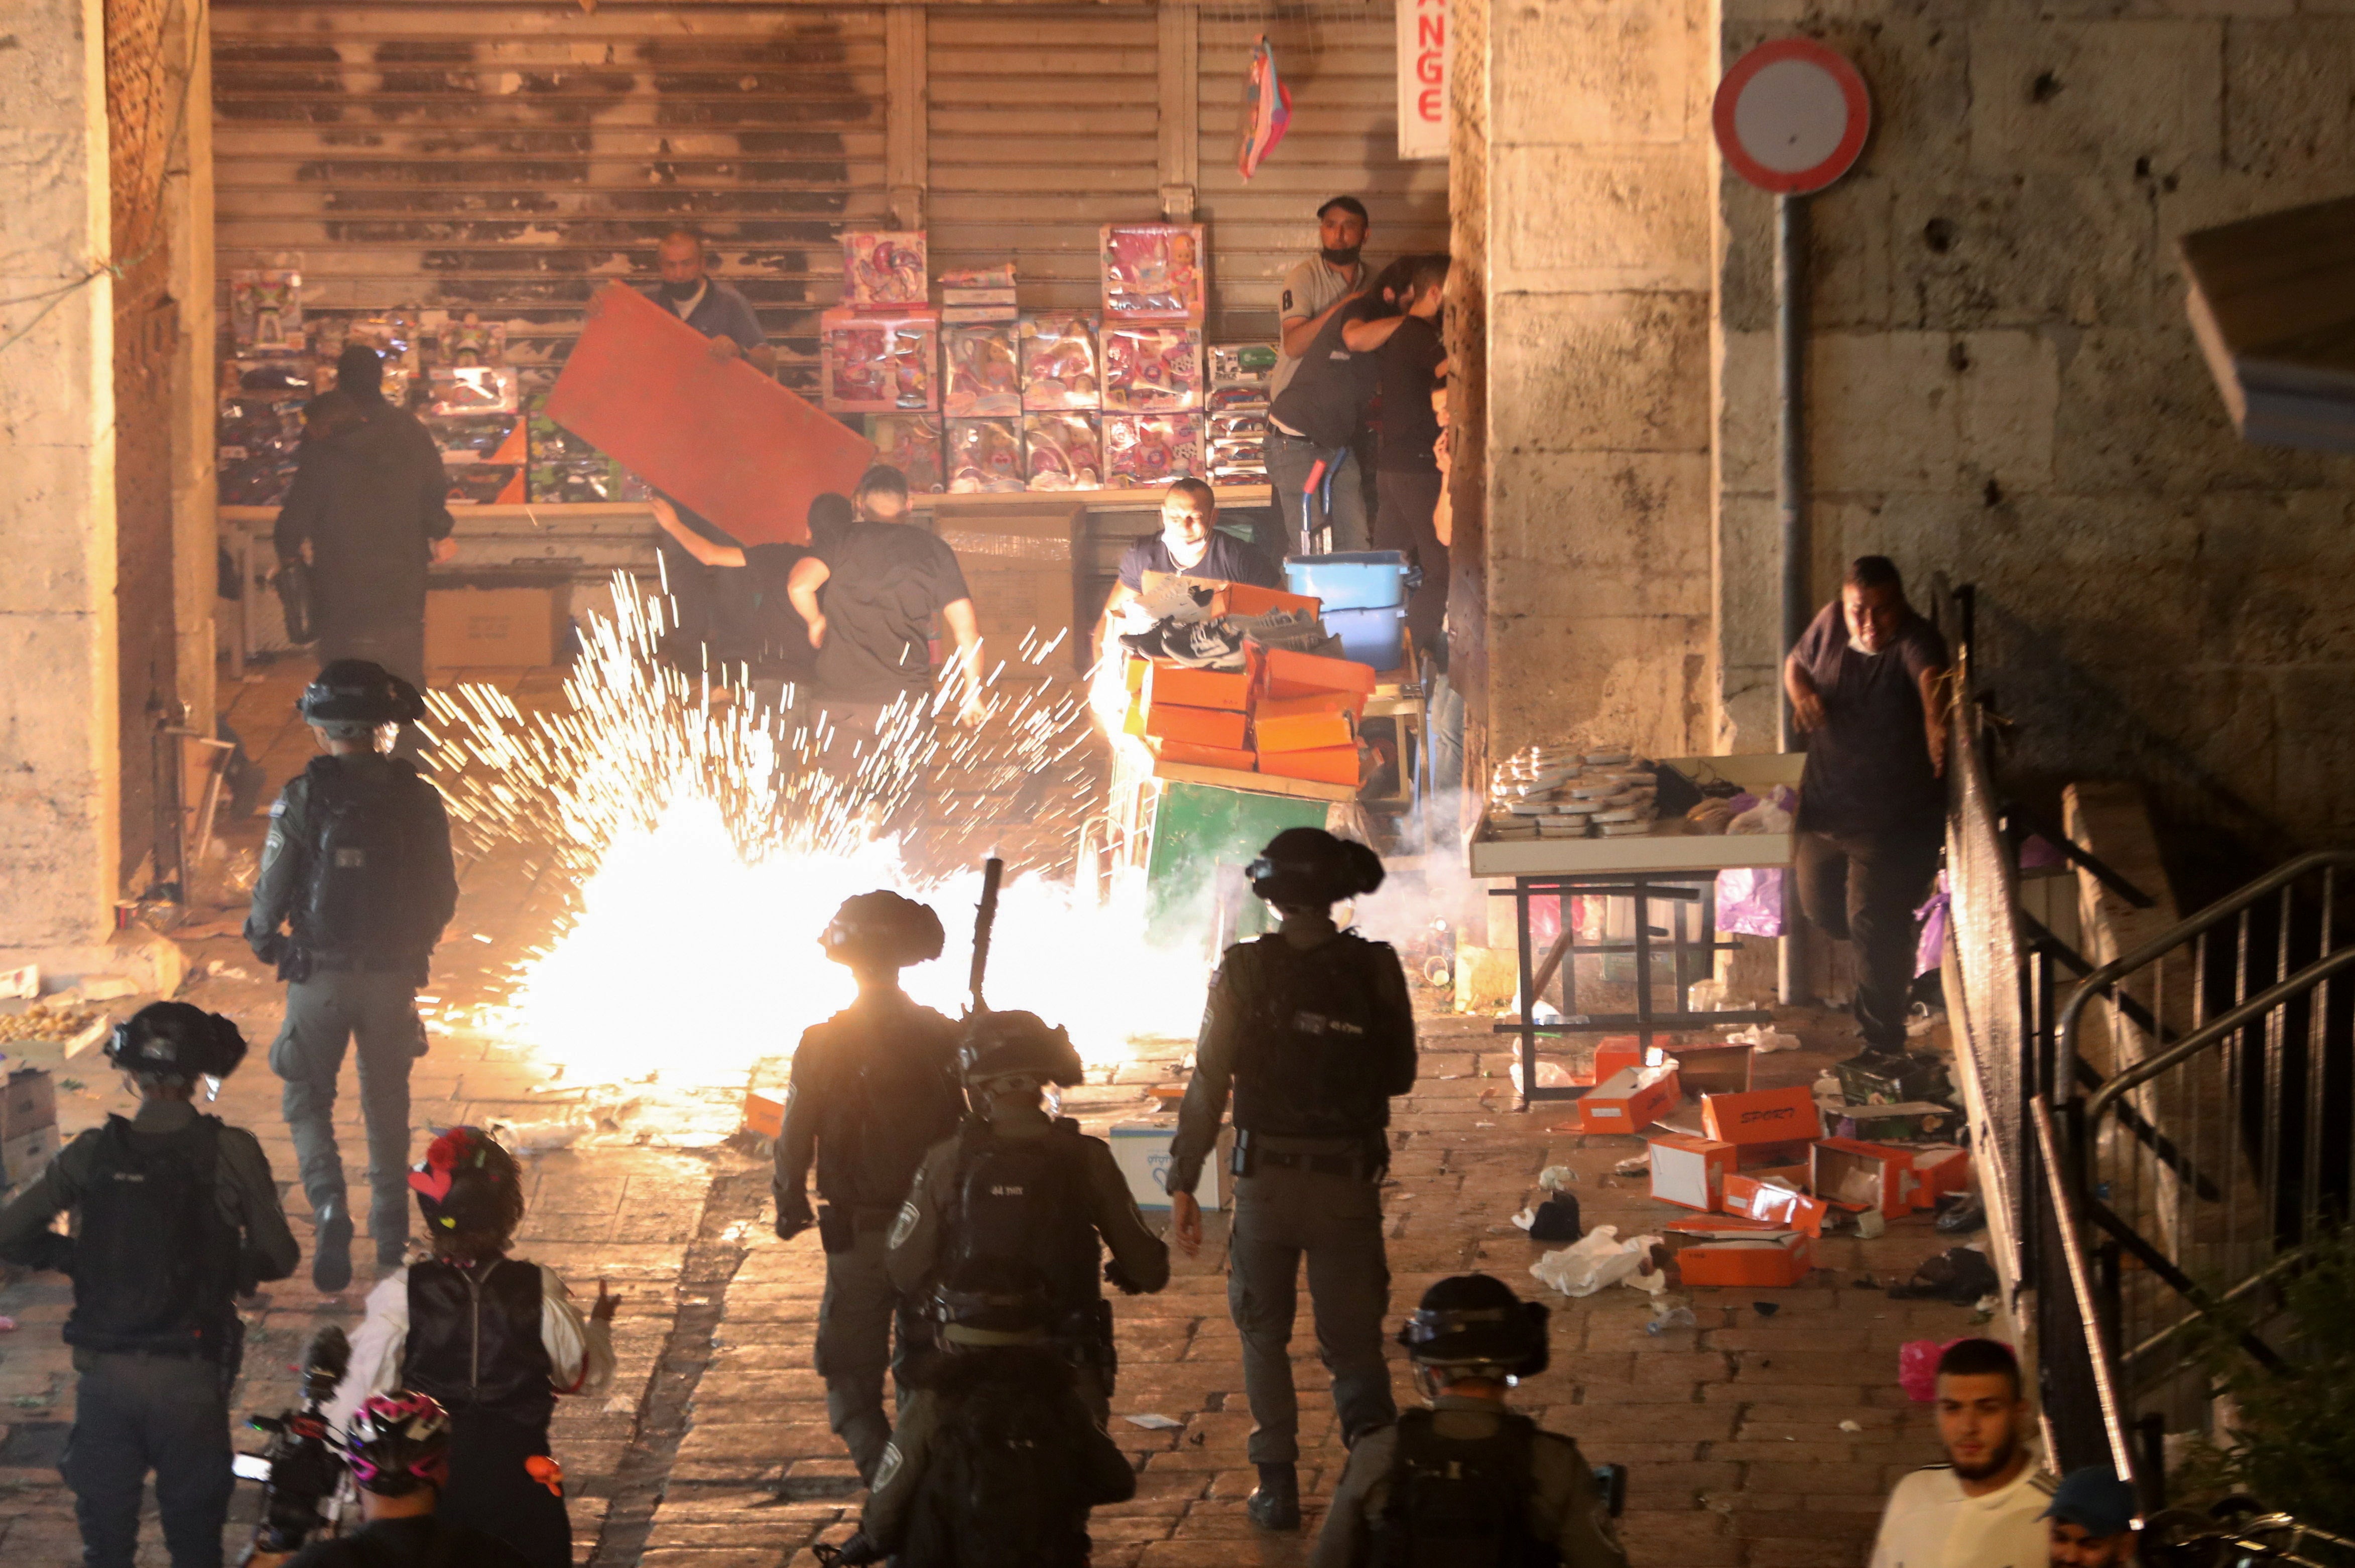 Palestinians react as Israeli police fire a stun grenade during clashes at Damascus Gate